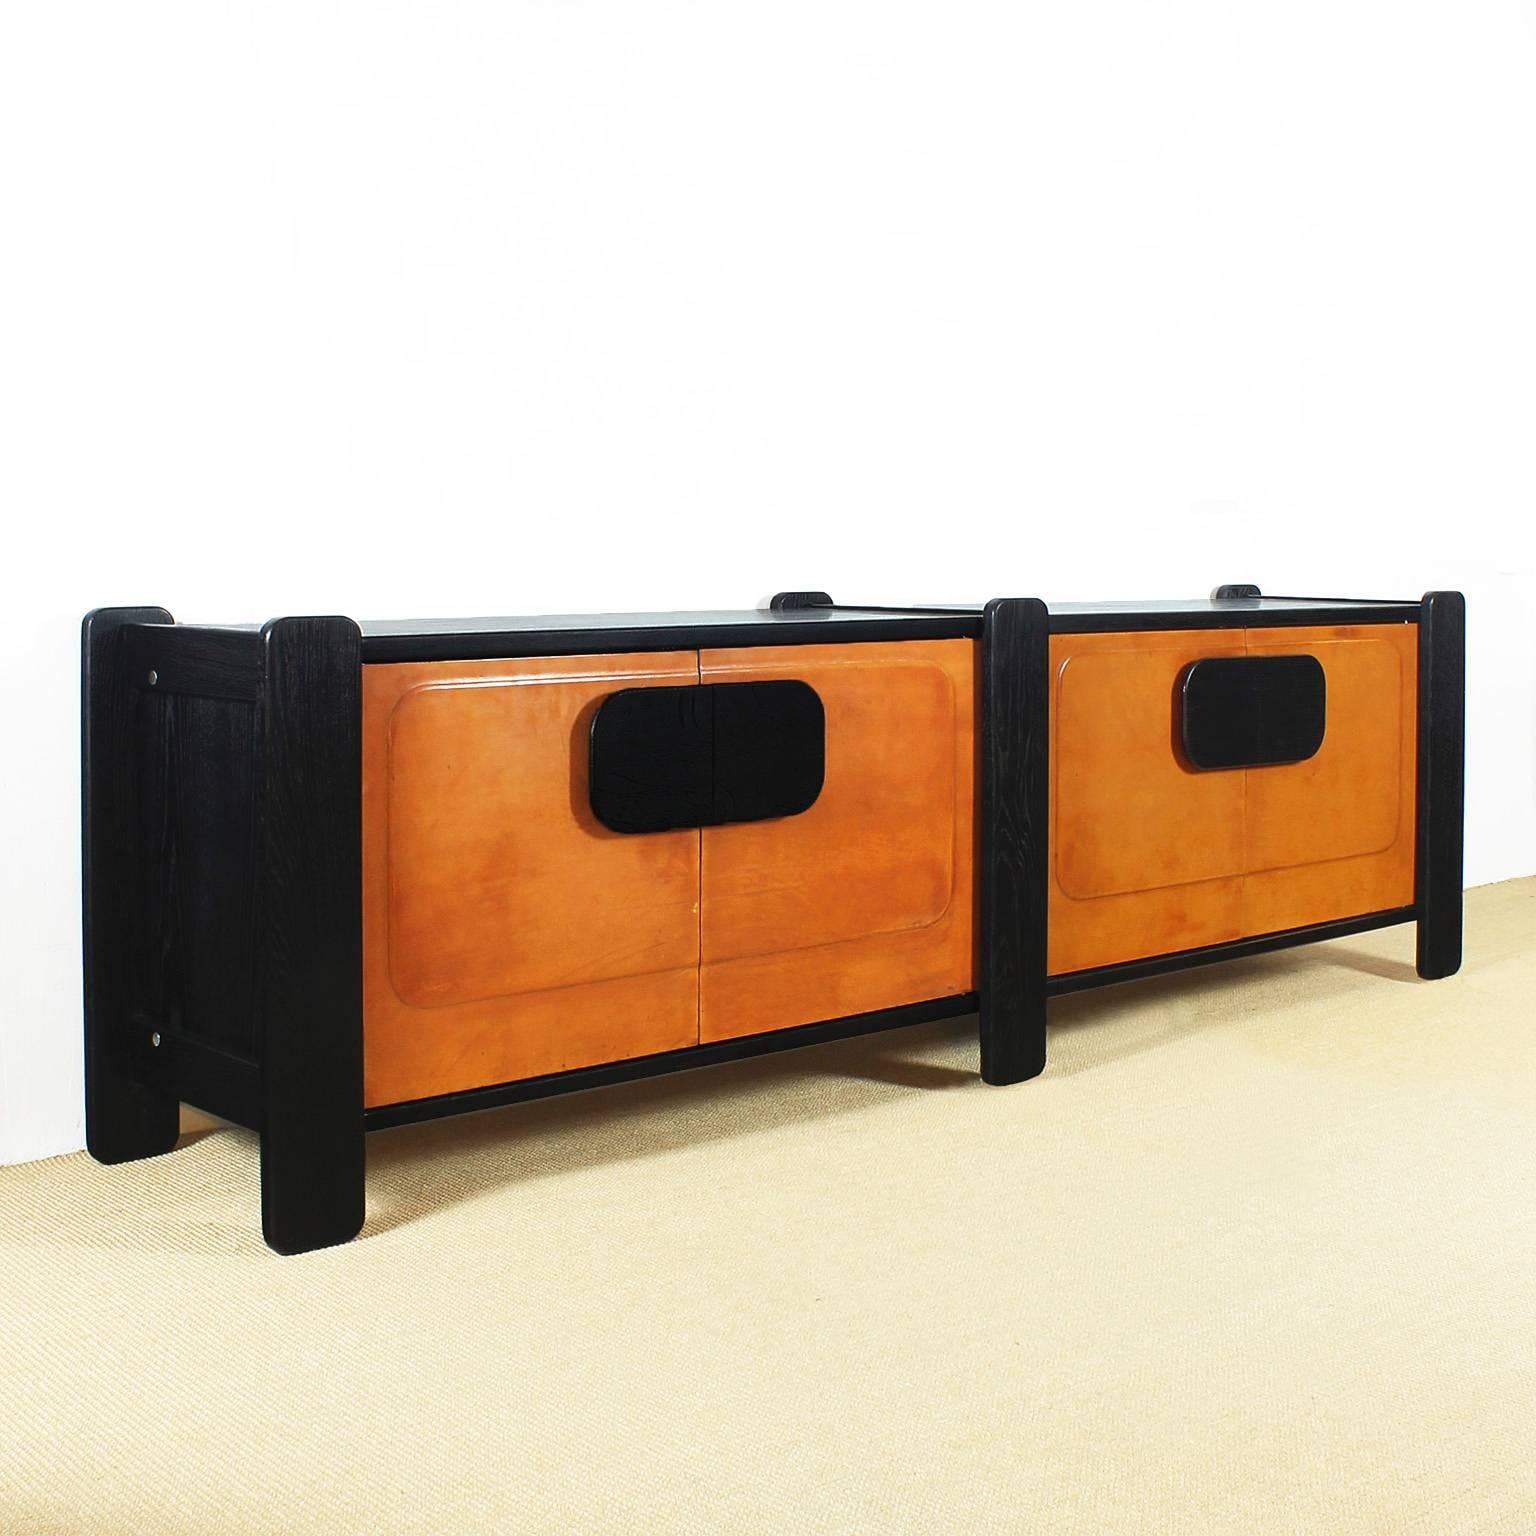 Big sideboard, black stained oakwood, satiny French polish, four doors covered with sheepskin,

France, circa 1970.